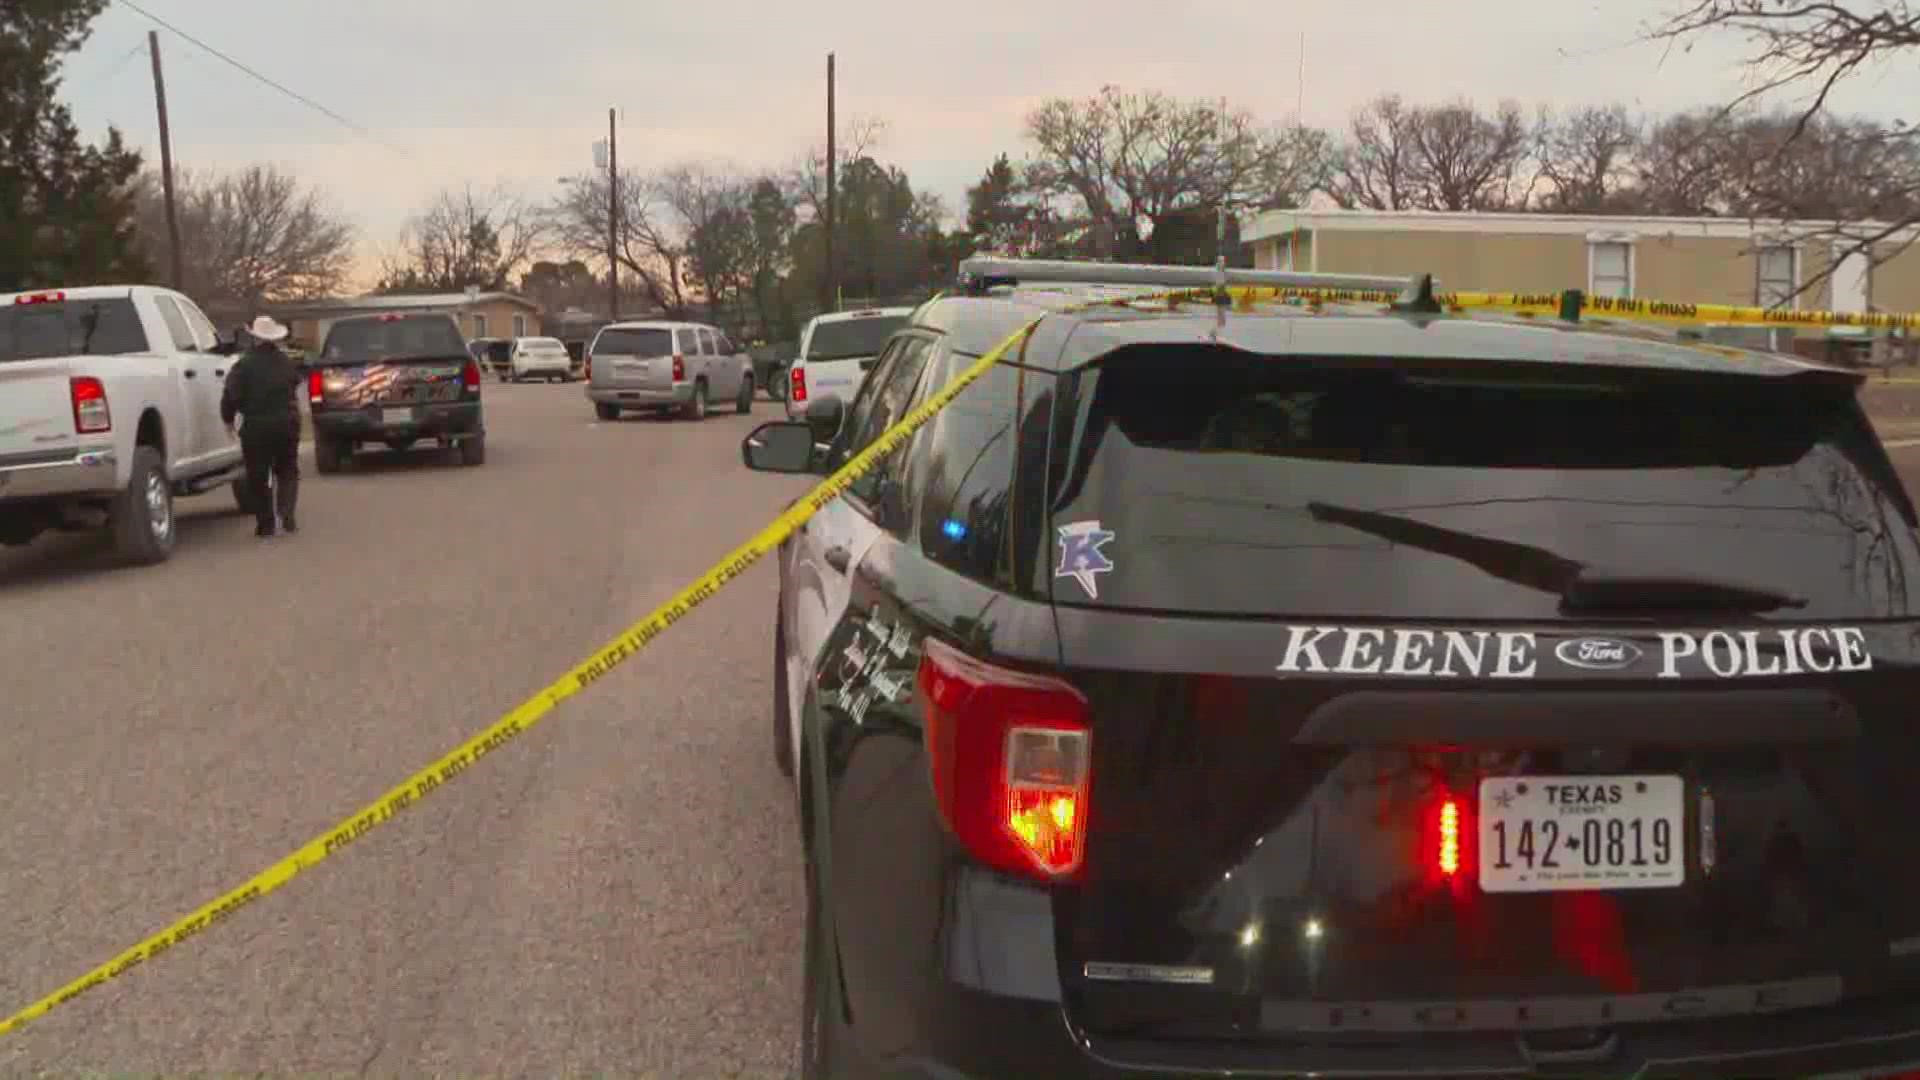 Three people were shot in Keene, TX, Tuesday, Jan.11 -- at least one has died, police said.